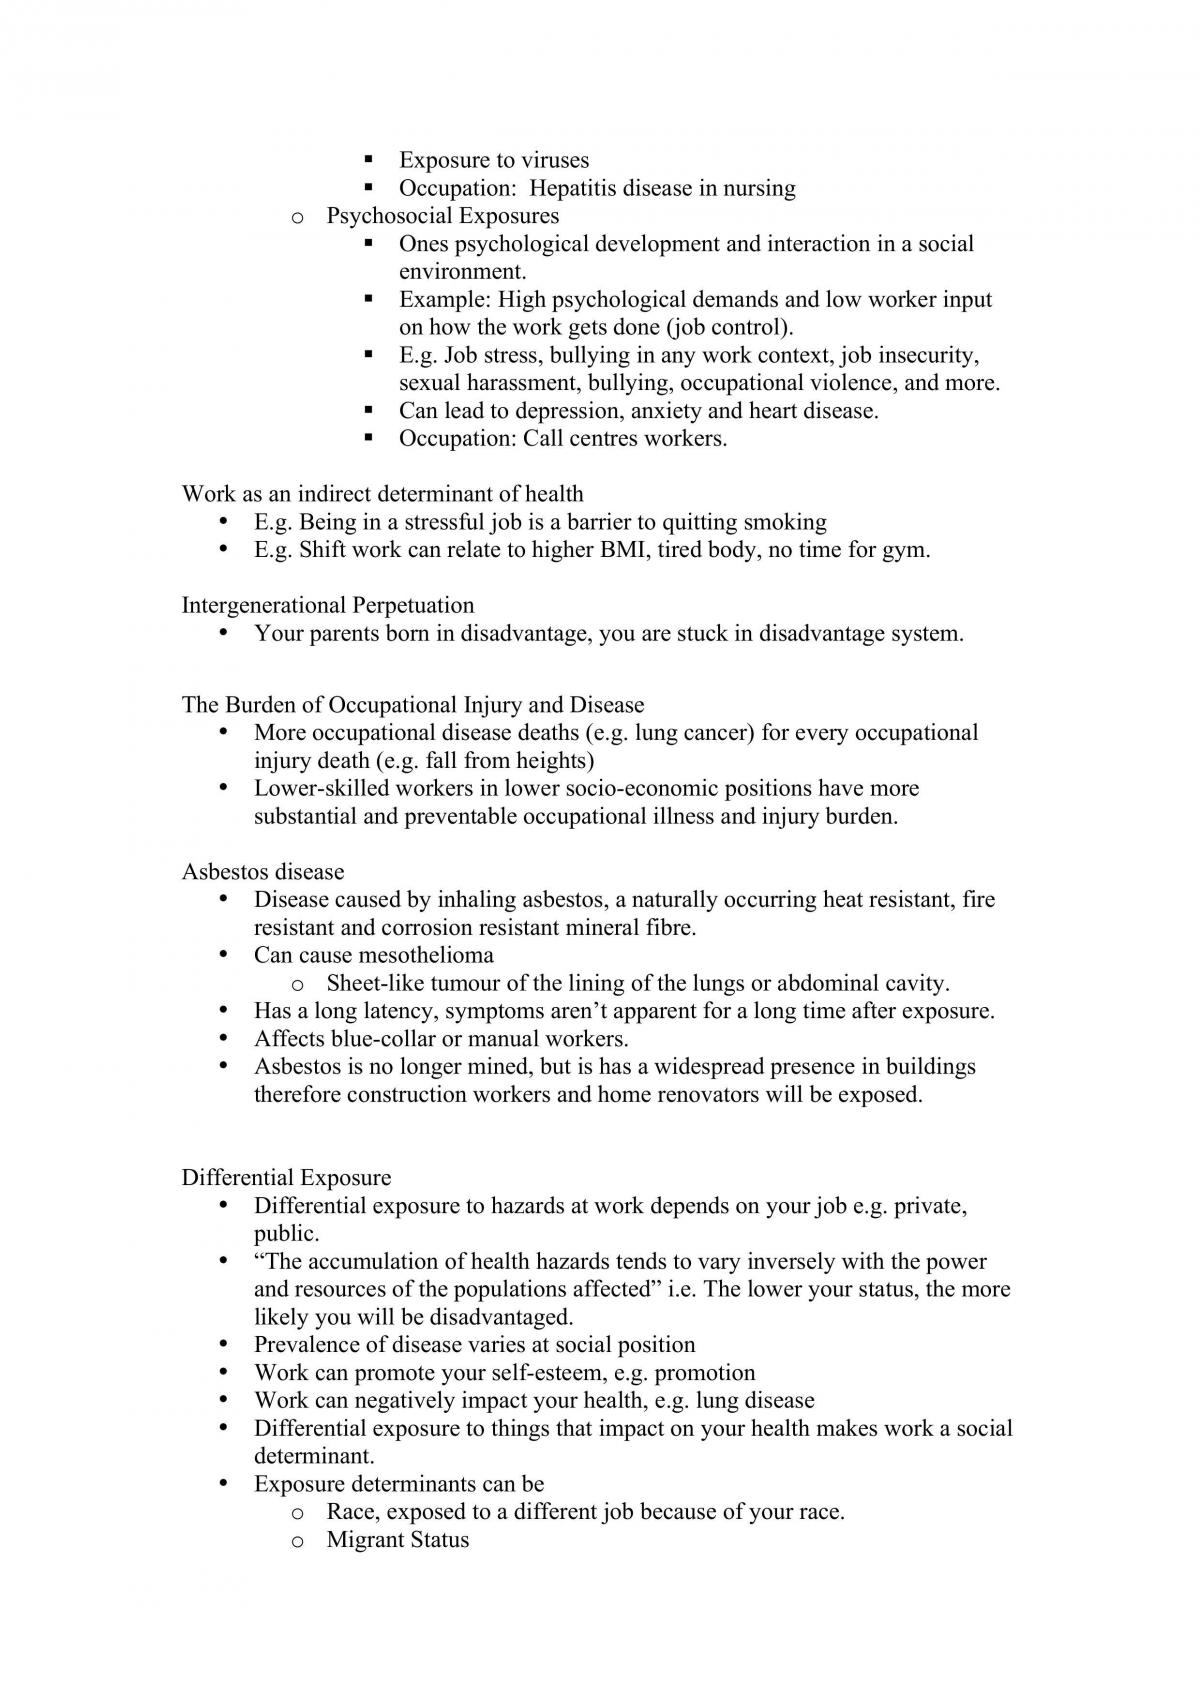 Understanding Health Notes - Page 22